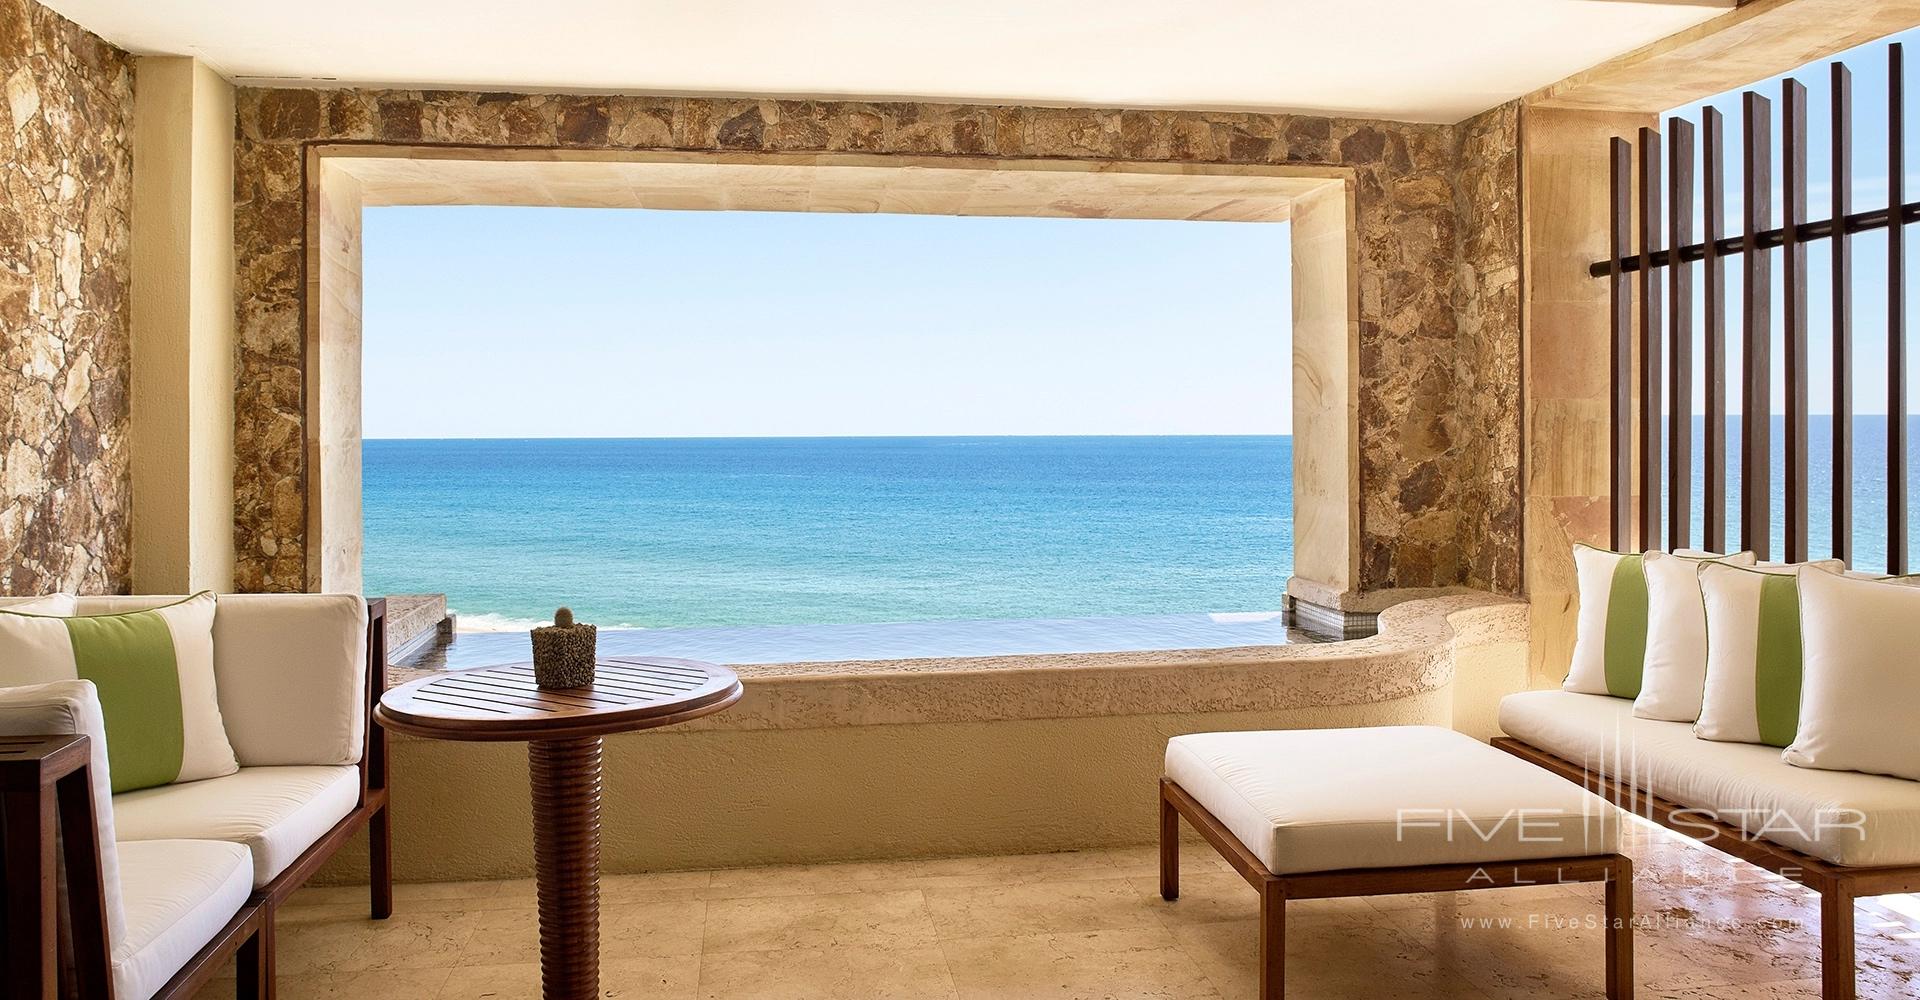 Waldorf Astoria Los Cabos Pedregal Terrace and Plunge Pool